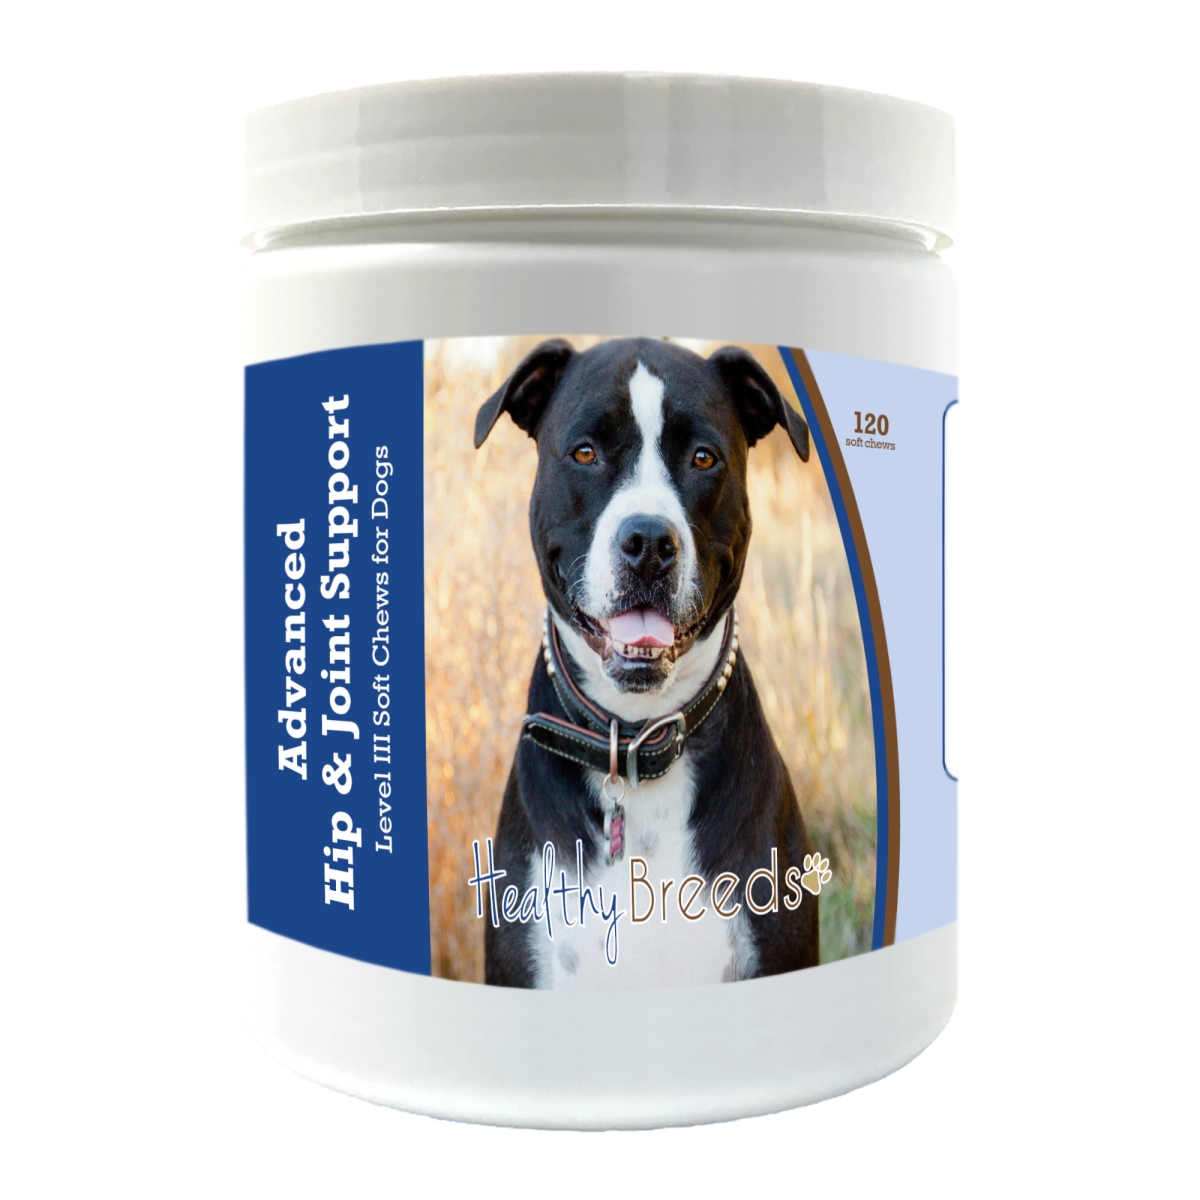 Picture of Healthy Breeds 192959898866 Pit Bull Advanced Hip & Joint Support Level III Soft Chews for Dogs